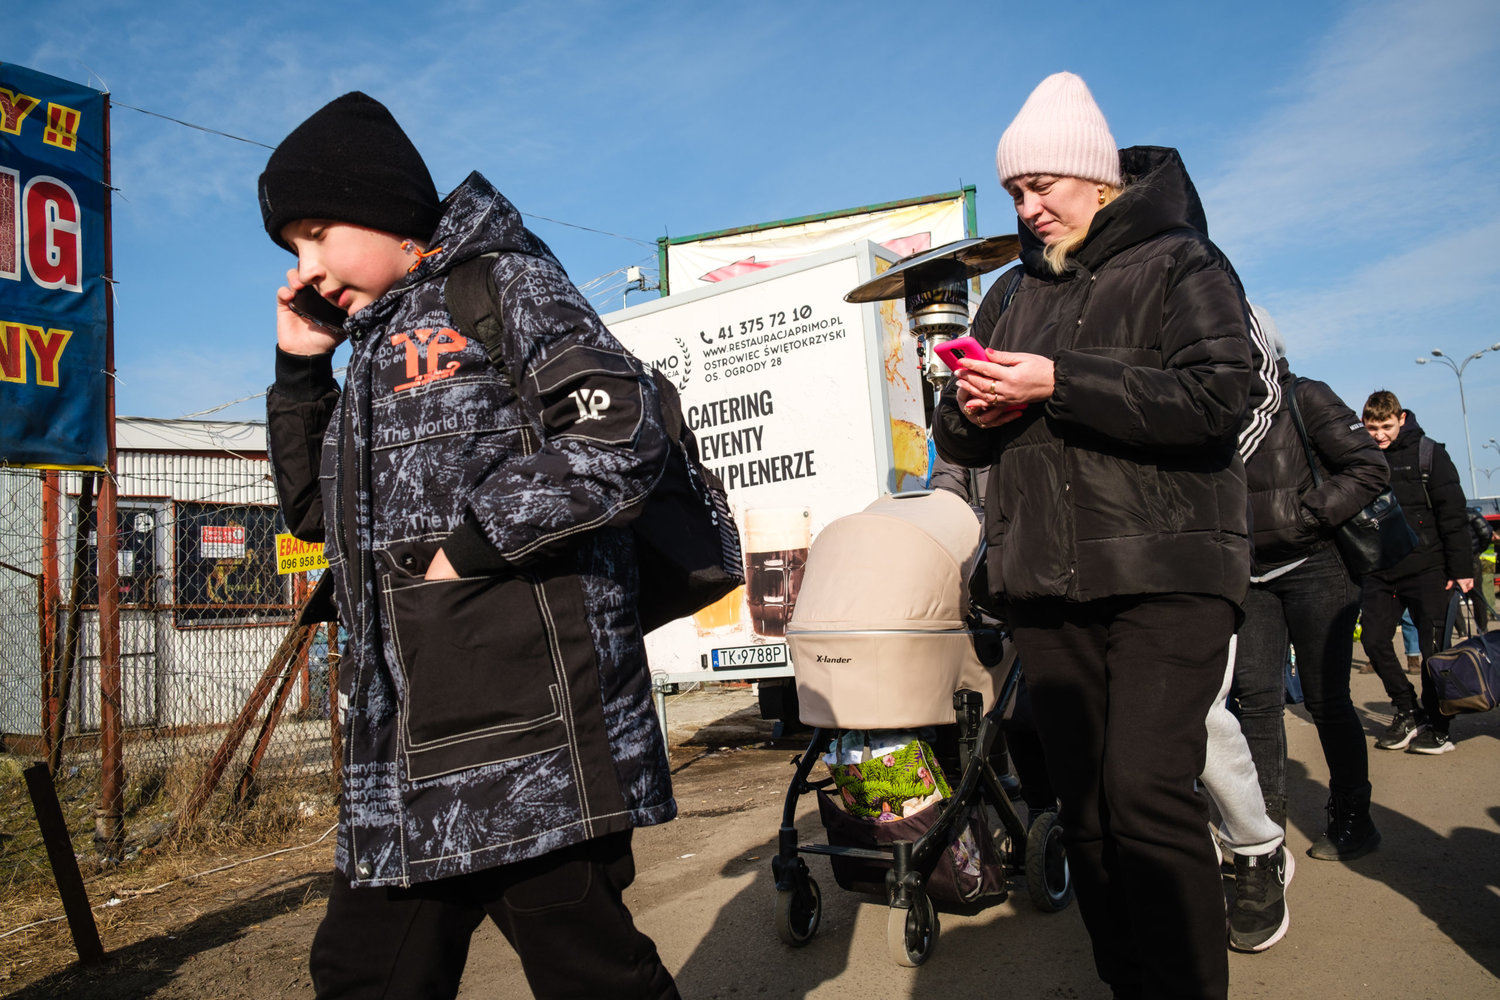 Ukrainian refugees entering Poland are finding help at the hands of Southern Baptists. (Photo/IMB)